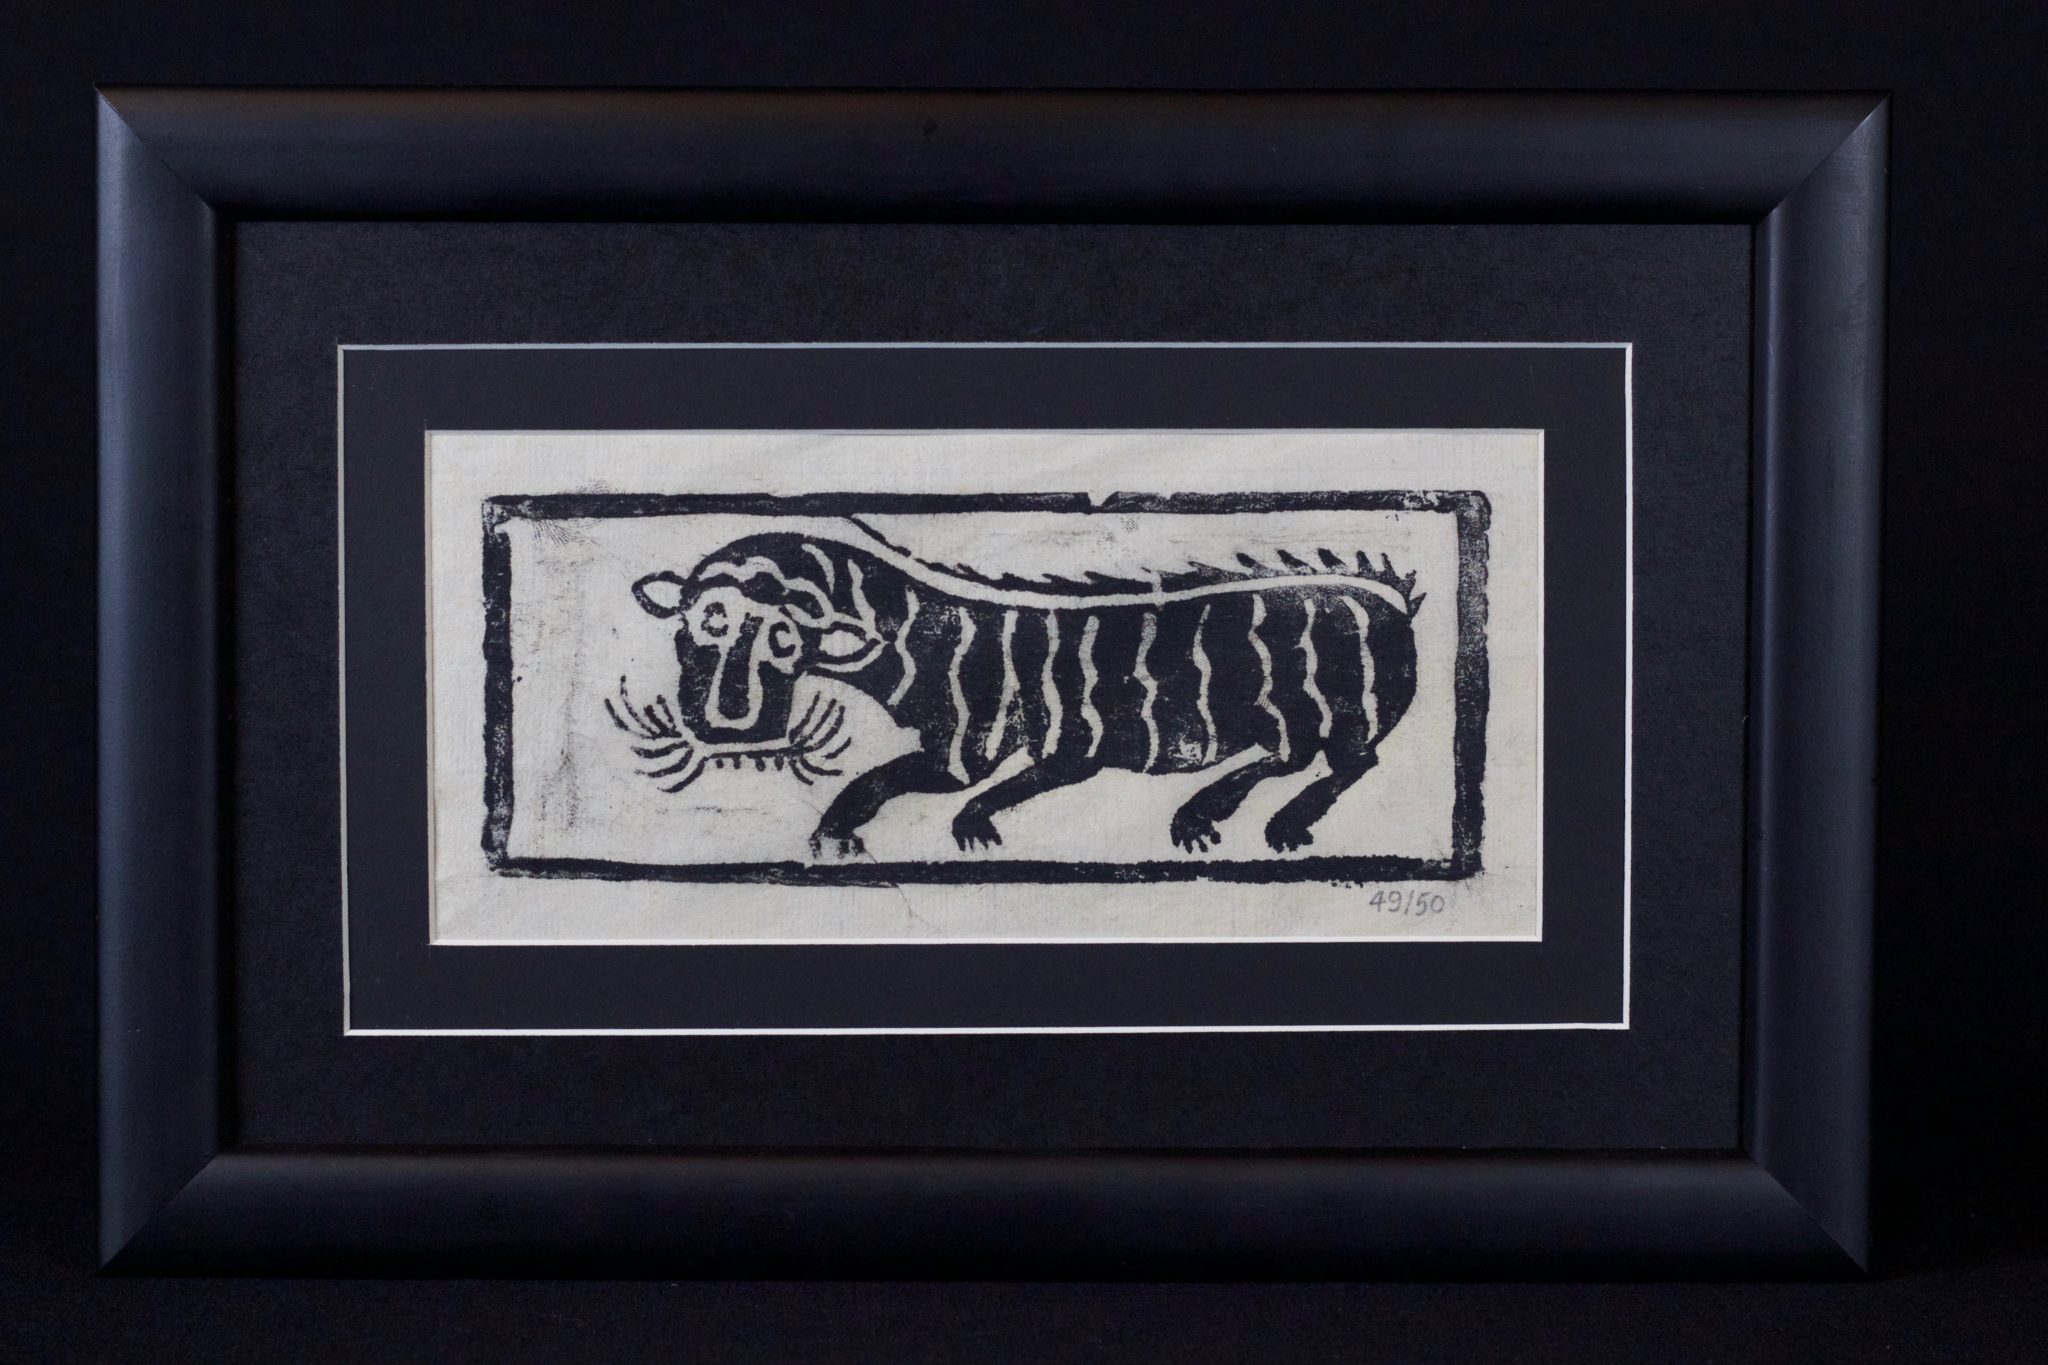 Shamanic Print - Tiger, Vietnam Dao Lo Gang people, Contemporary, Pigment printed on handmade *Do paper from a hand carved, wooden shamanic printing block The print would be burned for carting a message to deities for protecting people against evil spirits. *Do is made from the bark of Rhamnoneuron balansae. 8” x 12” x ¾”, $55.